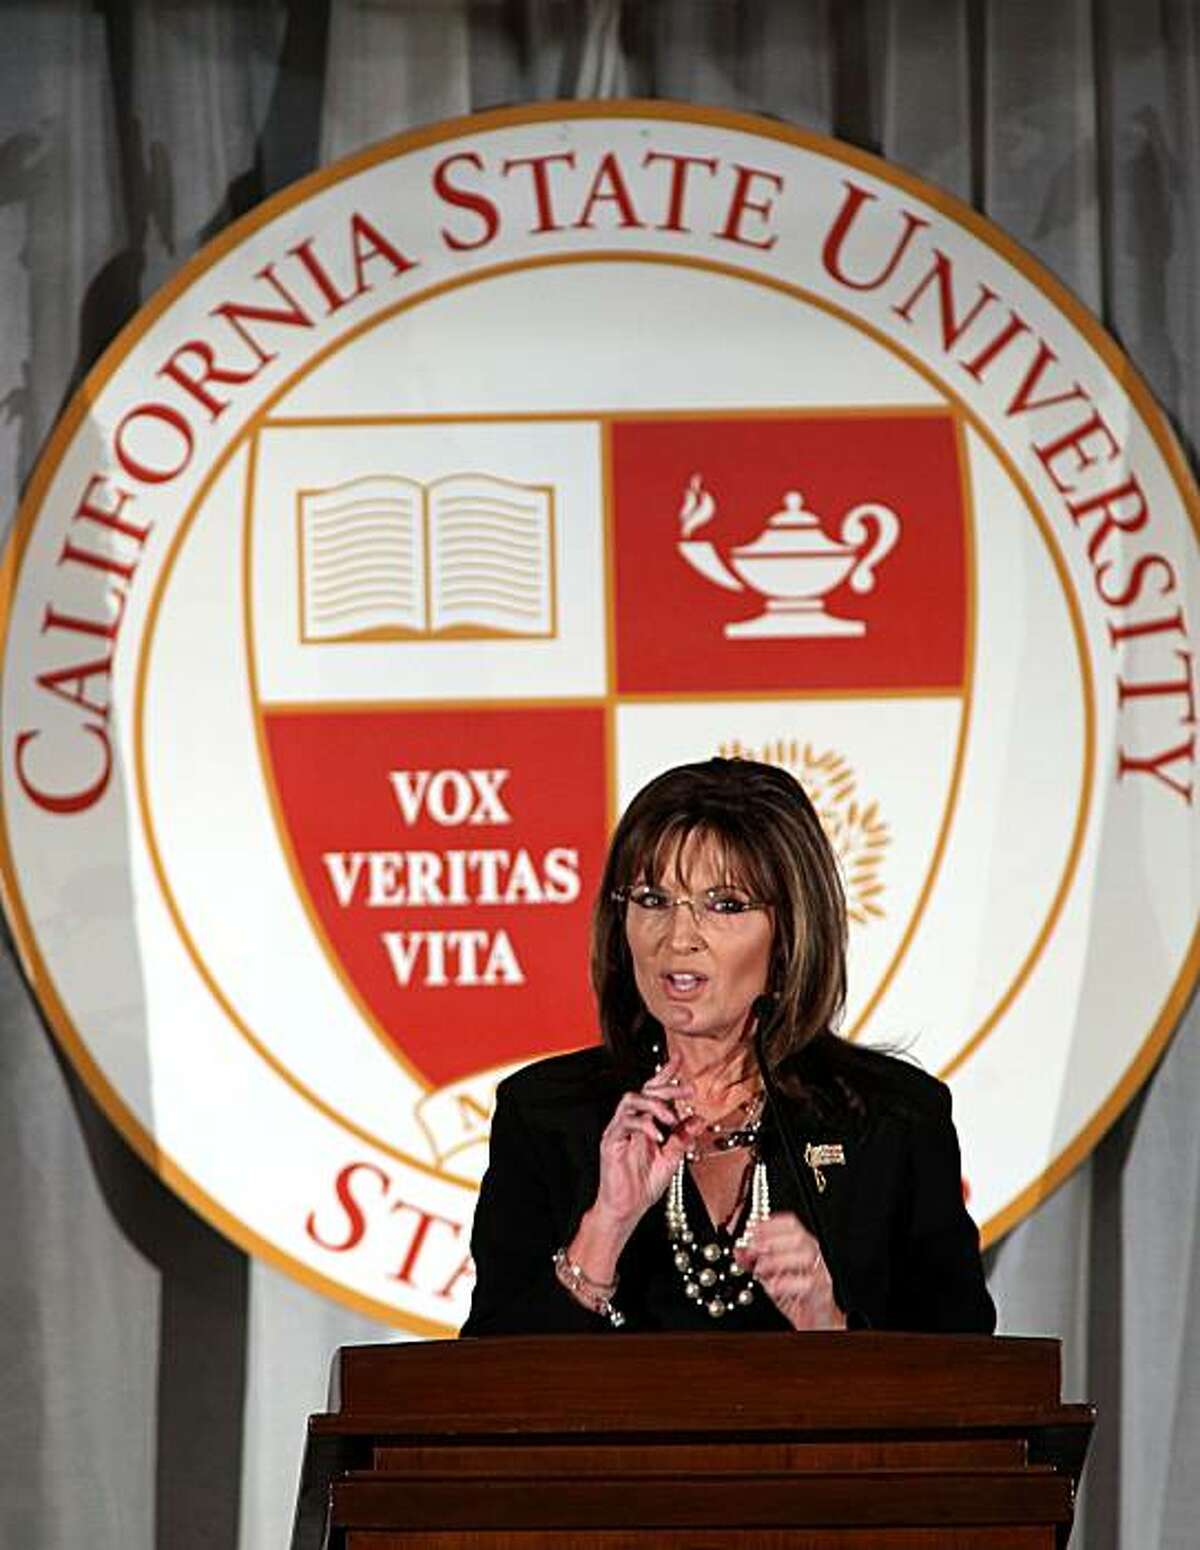 Former Republican vice presidential candidate Sarah Palin gestures during her speech at a fundraising dinner at California State University, Stanislaus in Turlock, Calif., Friday, June 25, 2010. Palin's speech has generated intense scrutiny since the nonprofit foundation holding the event first announced her visit in March. University officials have refused to divulge the terms of her contract or her speaking fee.